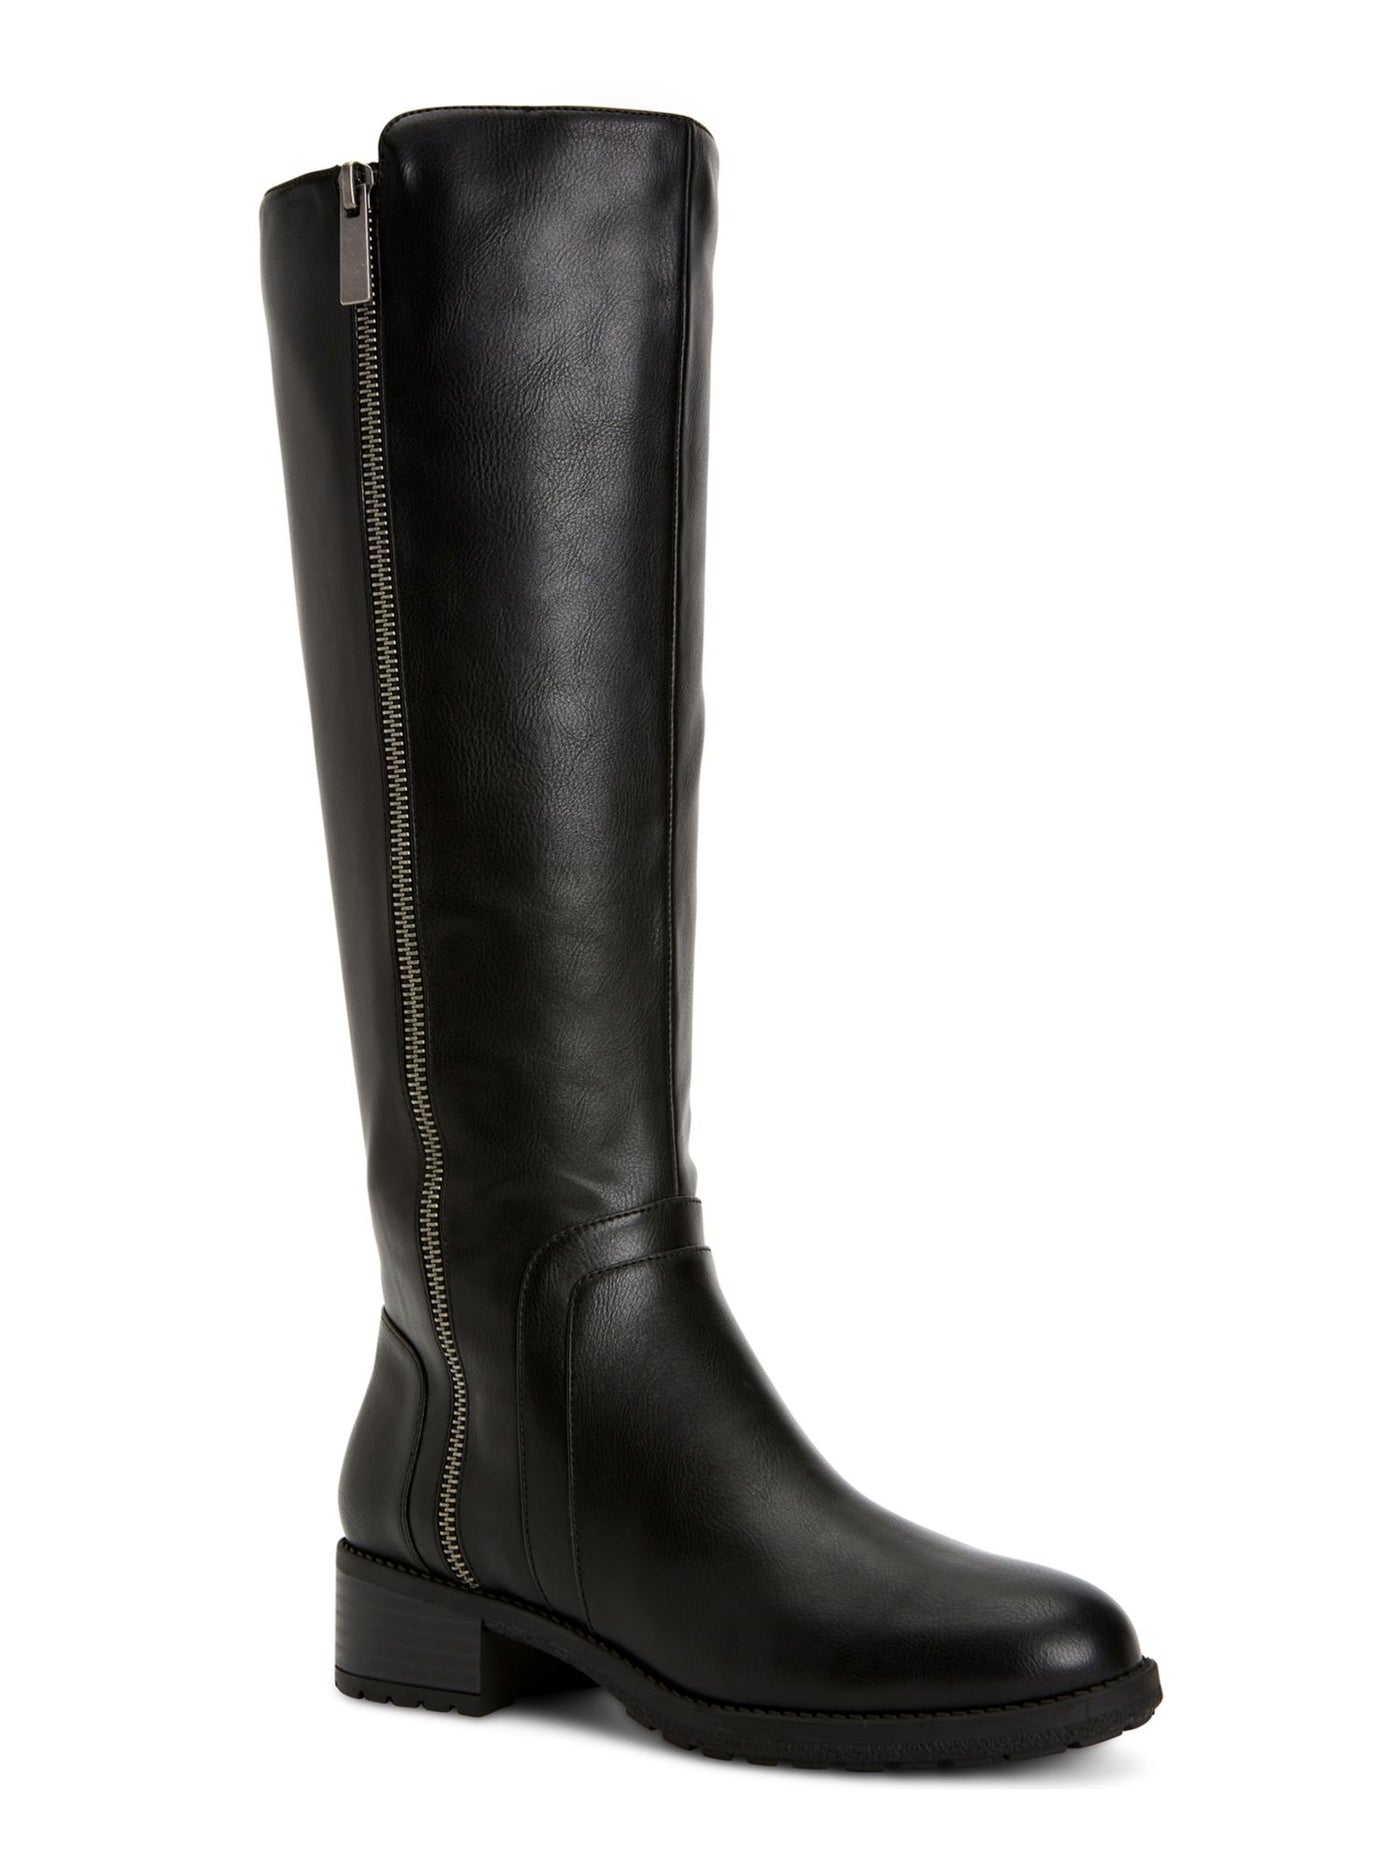 STYLE & COMPANY Womens Black Round Toe Zip-Up Boots Shoes 6